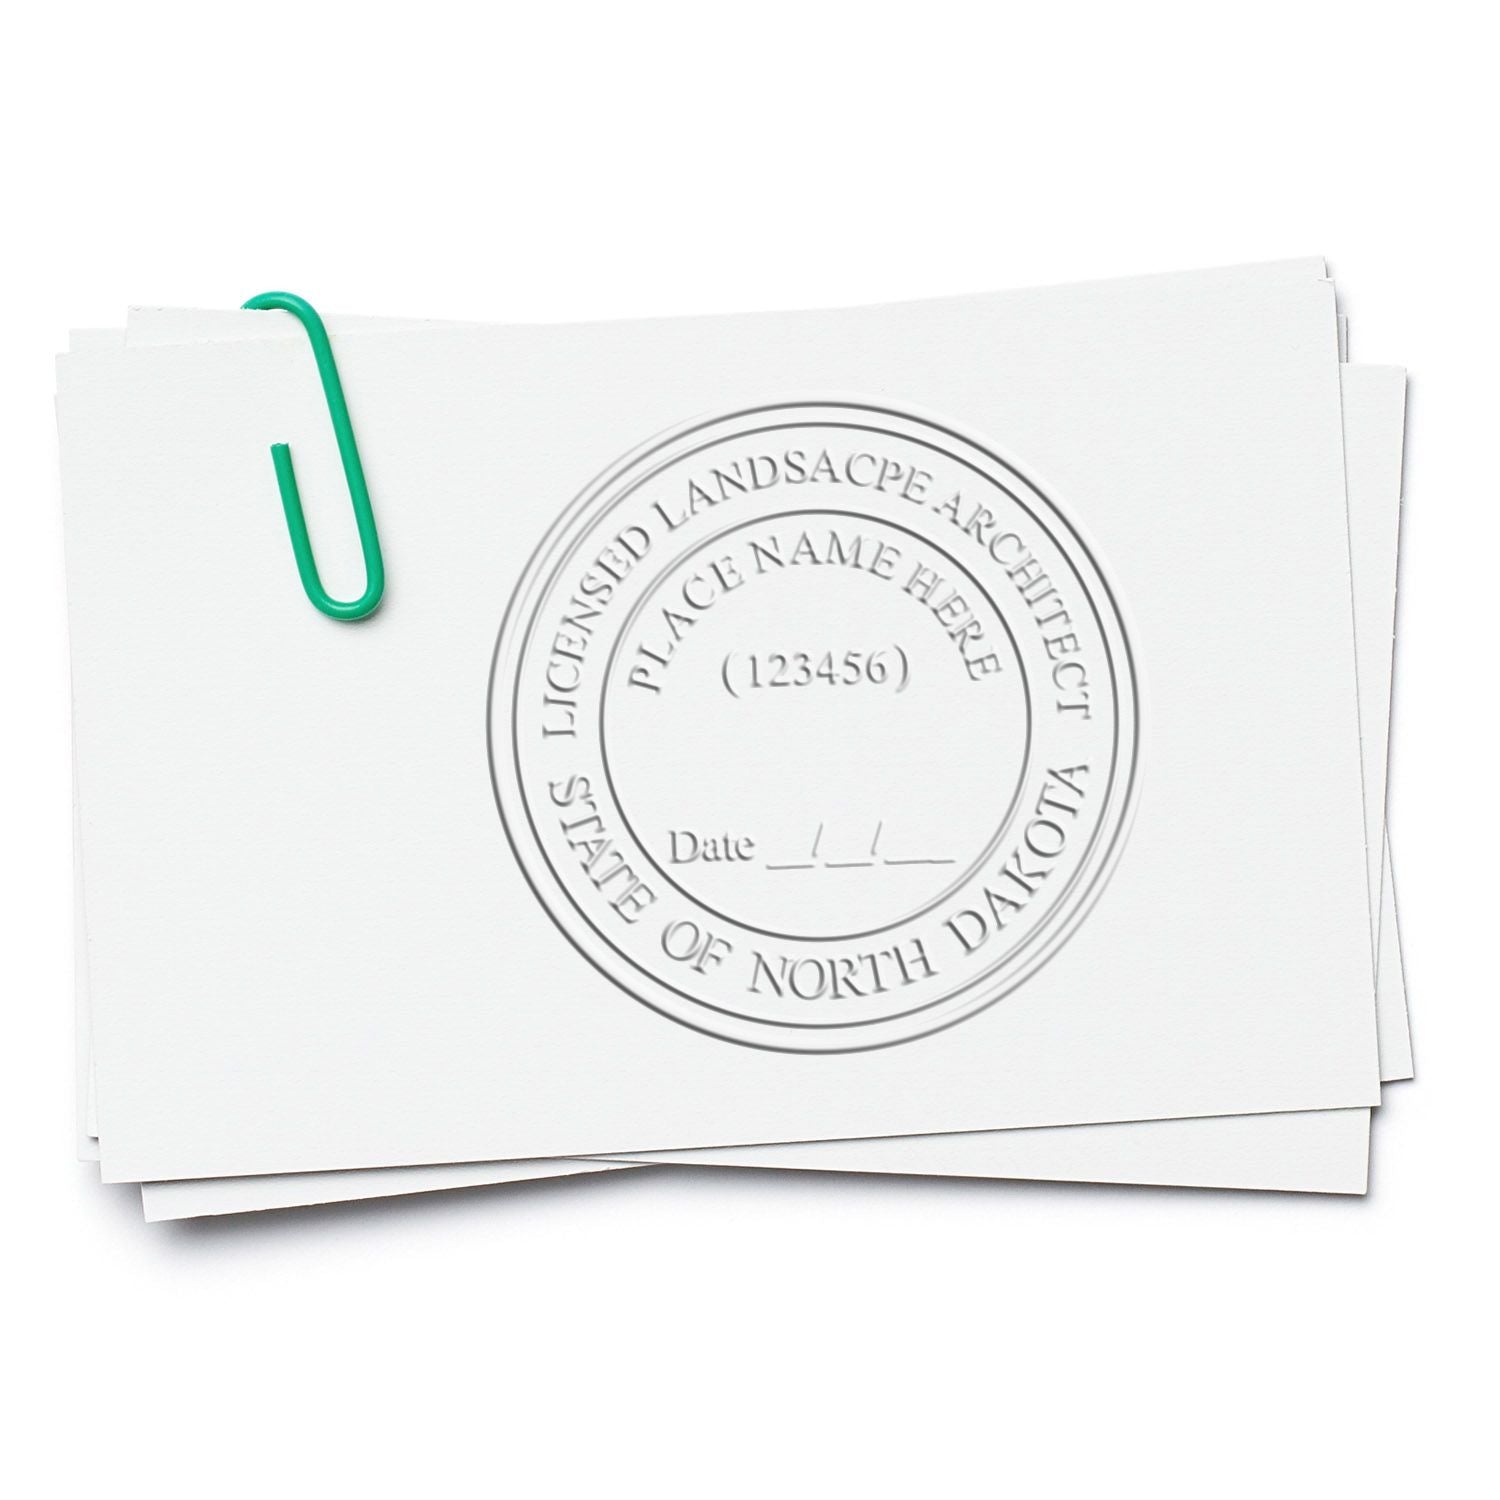 An alternative view of the Gift North Dakota Landscape Architect Seal stamped on a sheet of paper showing the image in use